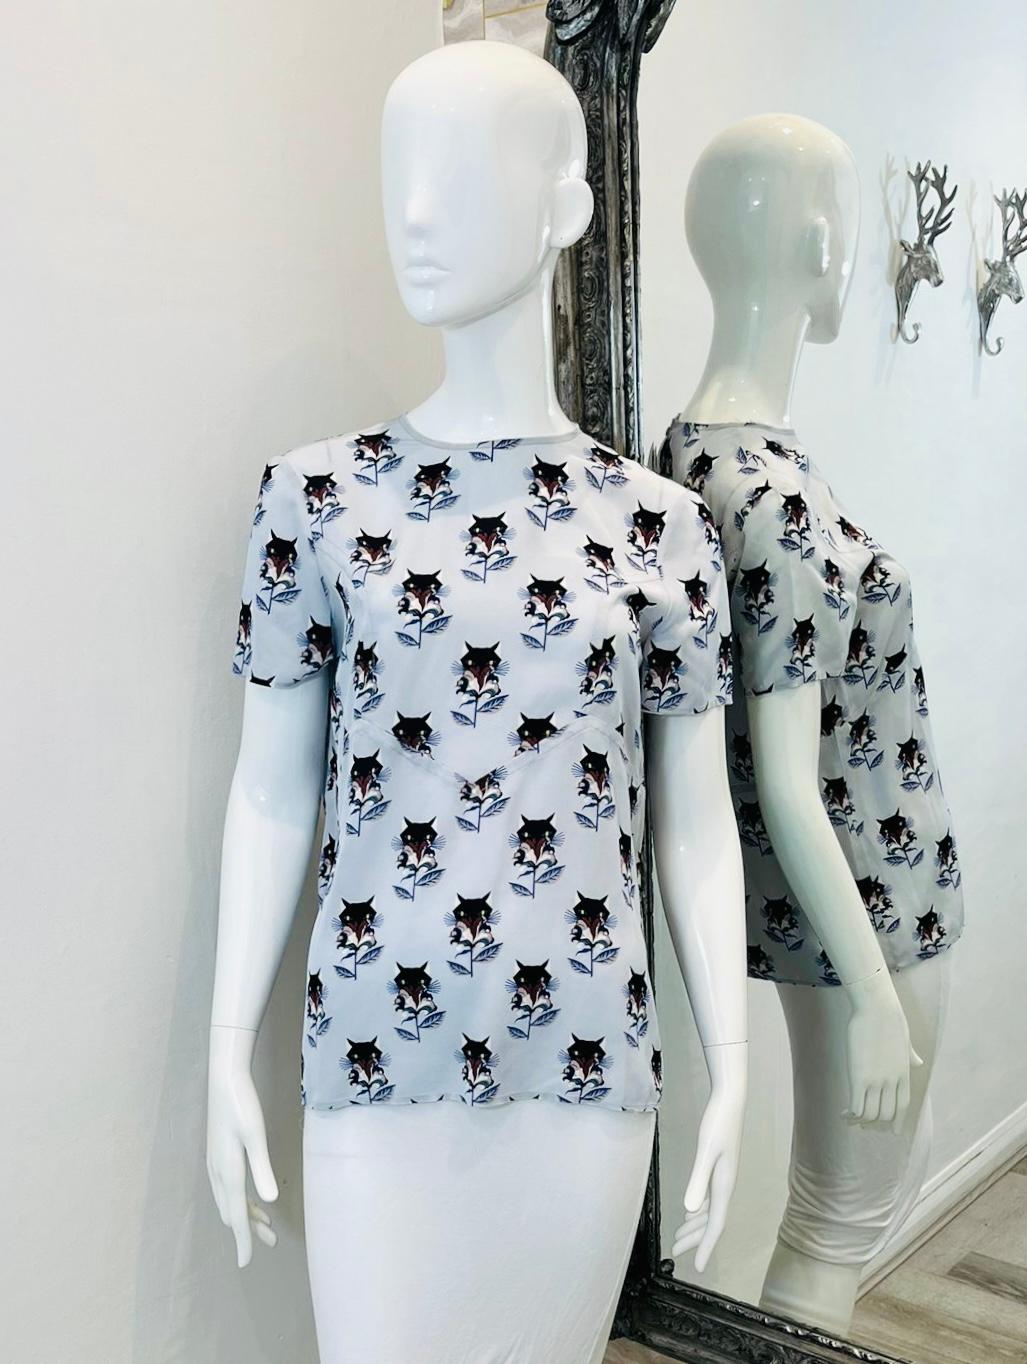 Miu Miu Cat Printed Silk Top

Baby blue blouse designed with cat and flower prints throughout.

Featuring crew neckline, short sleeves and keyhole button closure to rear.

Size – 42IT

Condition – Very Good

Composition – 100% Silk